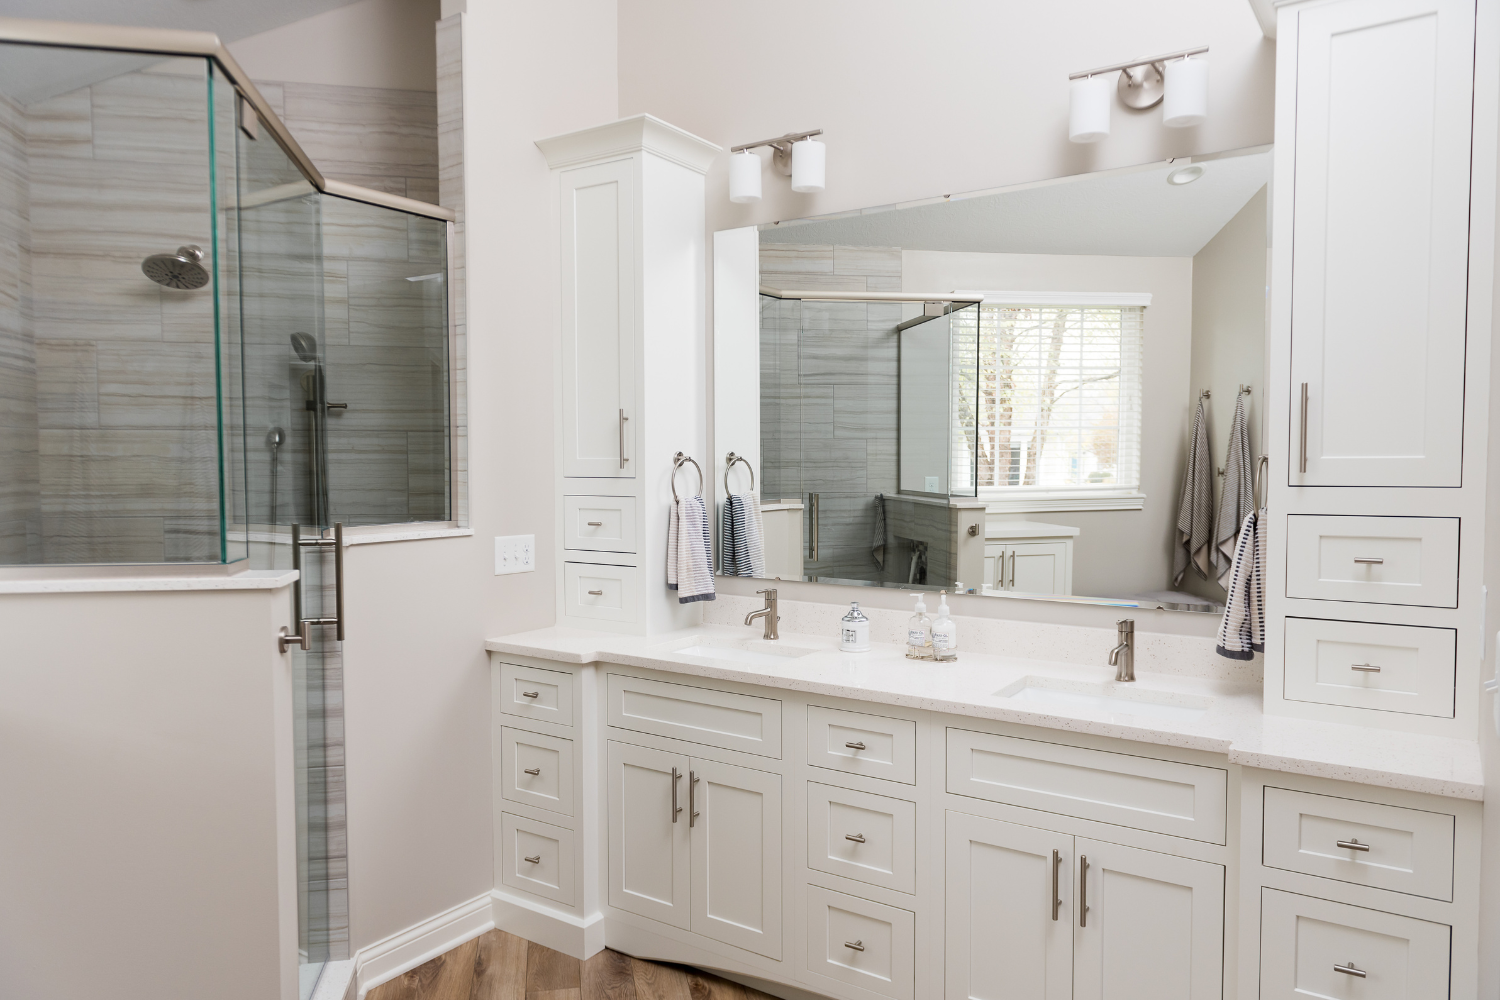 Nicholas Design Build | A bathroom remodel with white cabinets and a walk in shower.